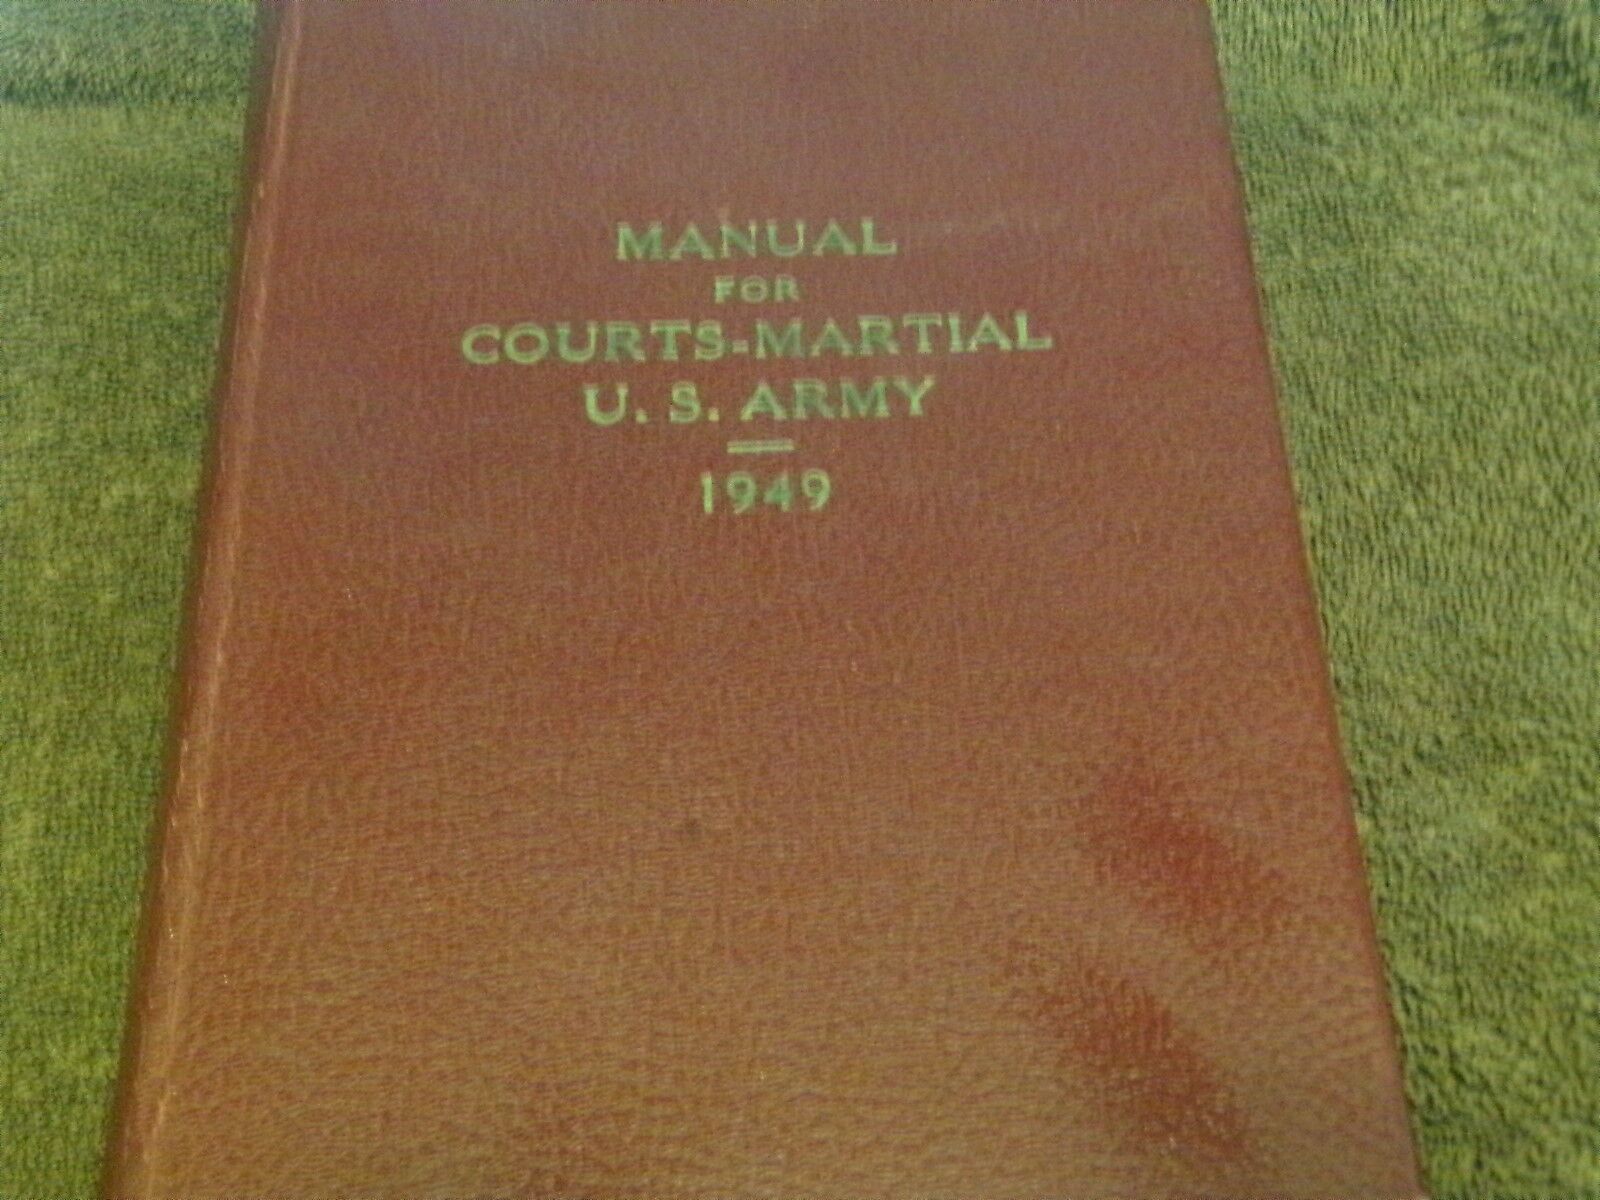 Manual For Courts-Martial, Printed 1949 by order of the President